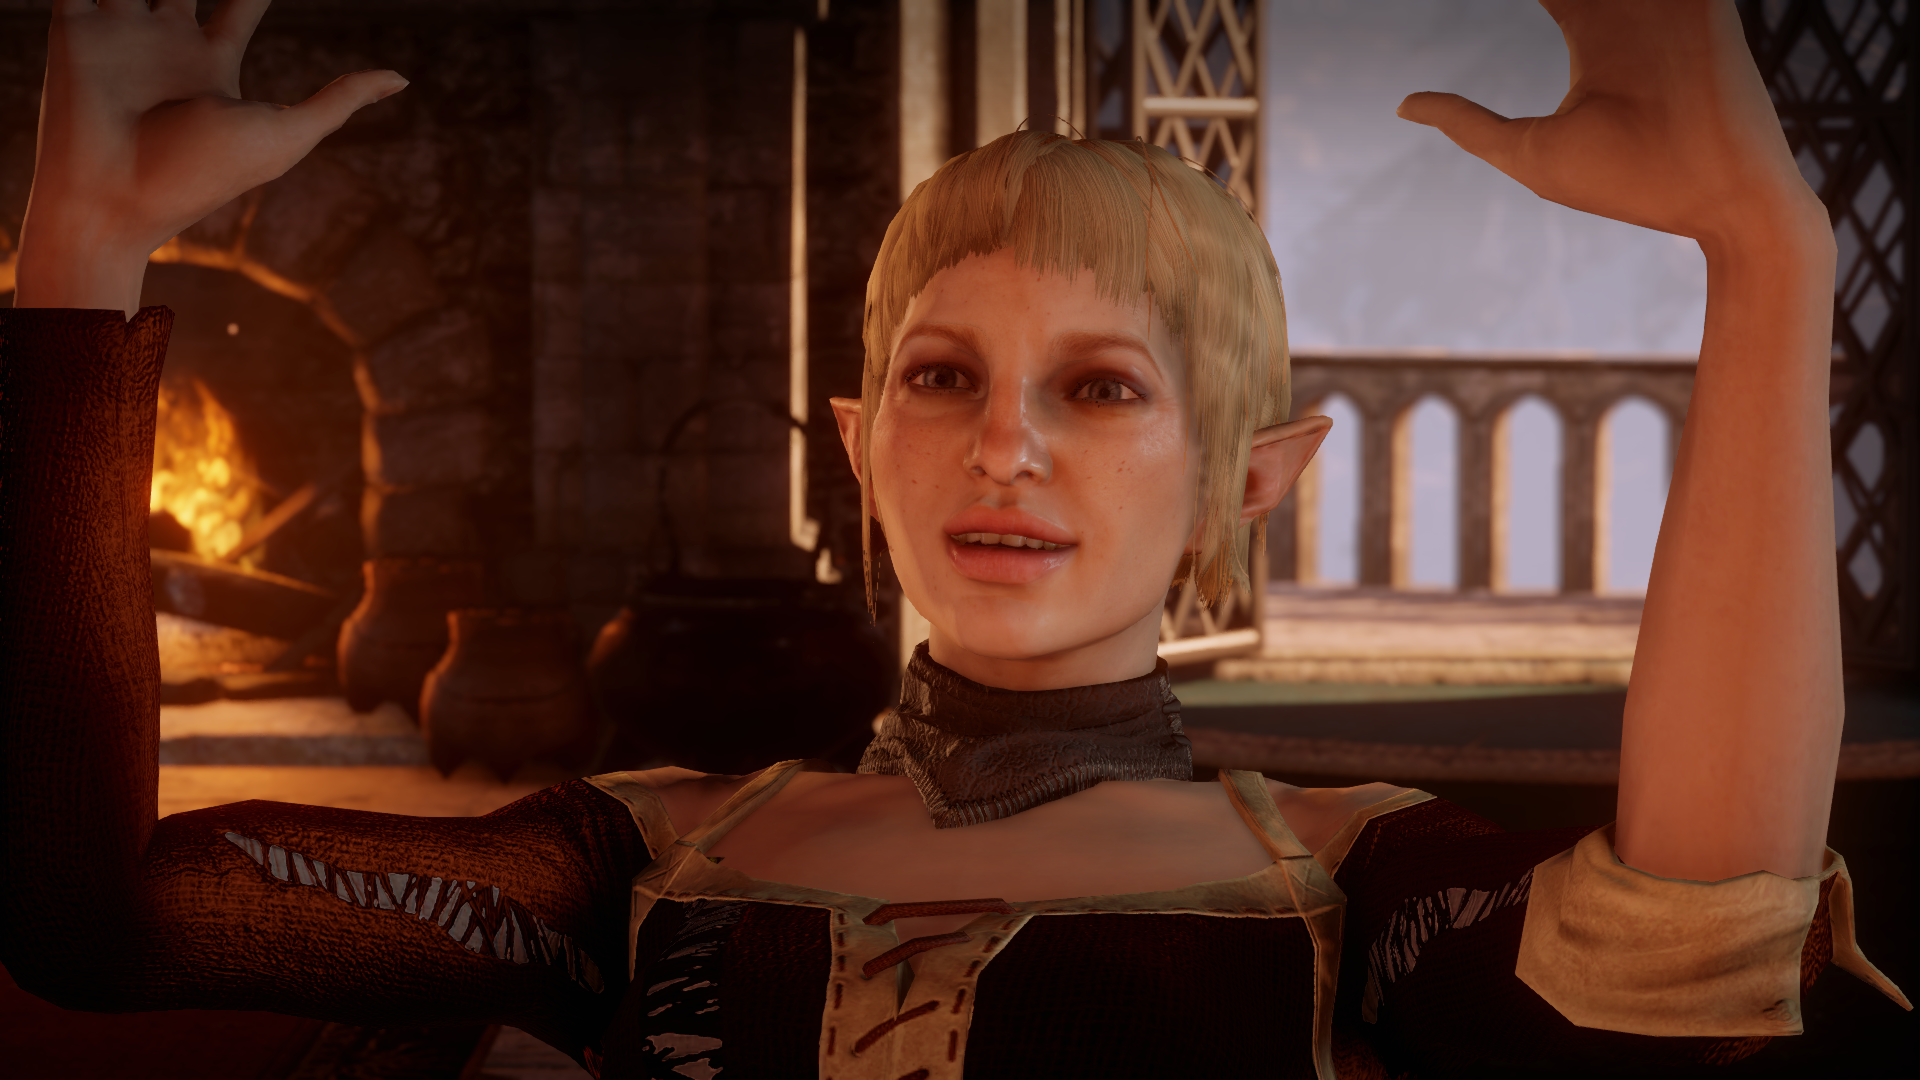 A Complete Gift Guide For Dragon Age: Origins